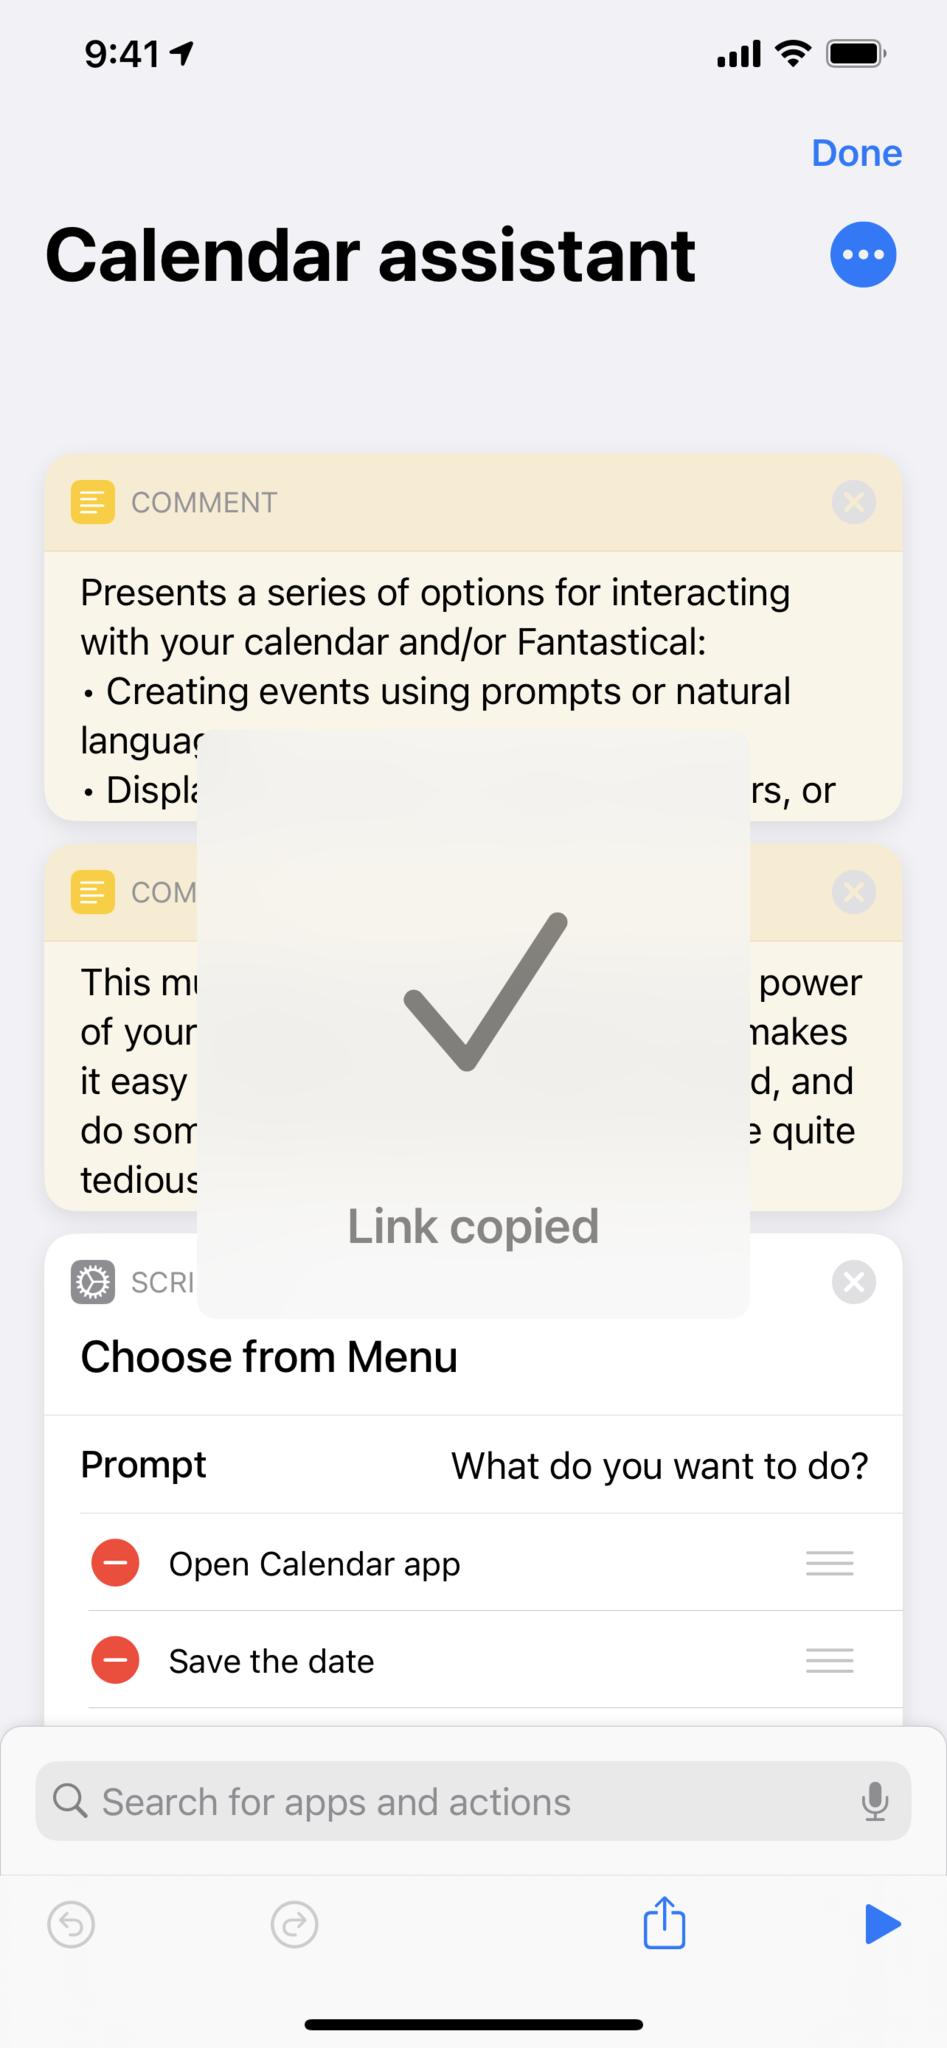 Screenshot showing the shared shortcut with a grey confirmation box that says "Link Copied."